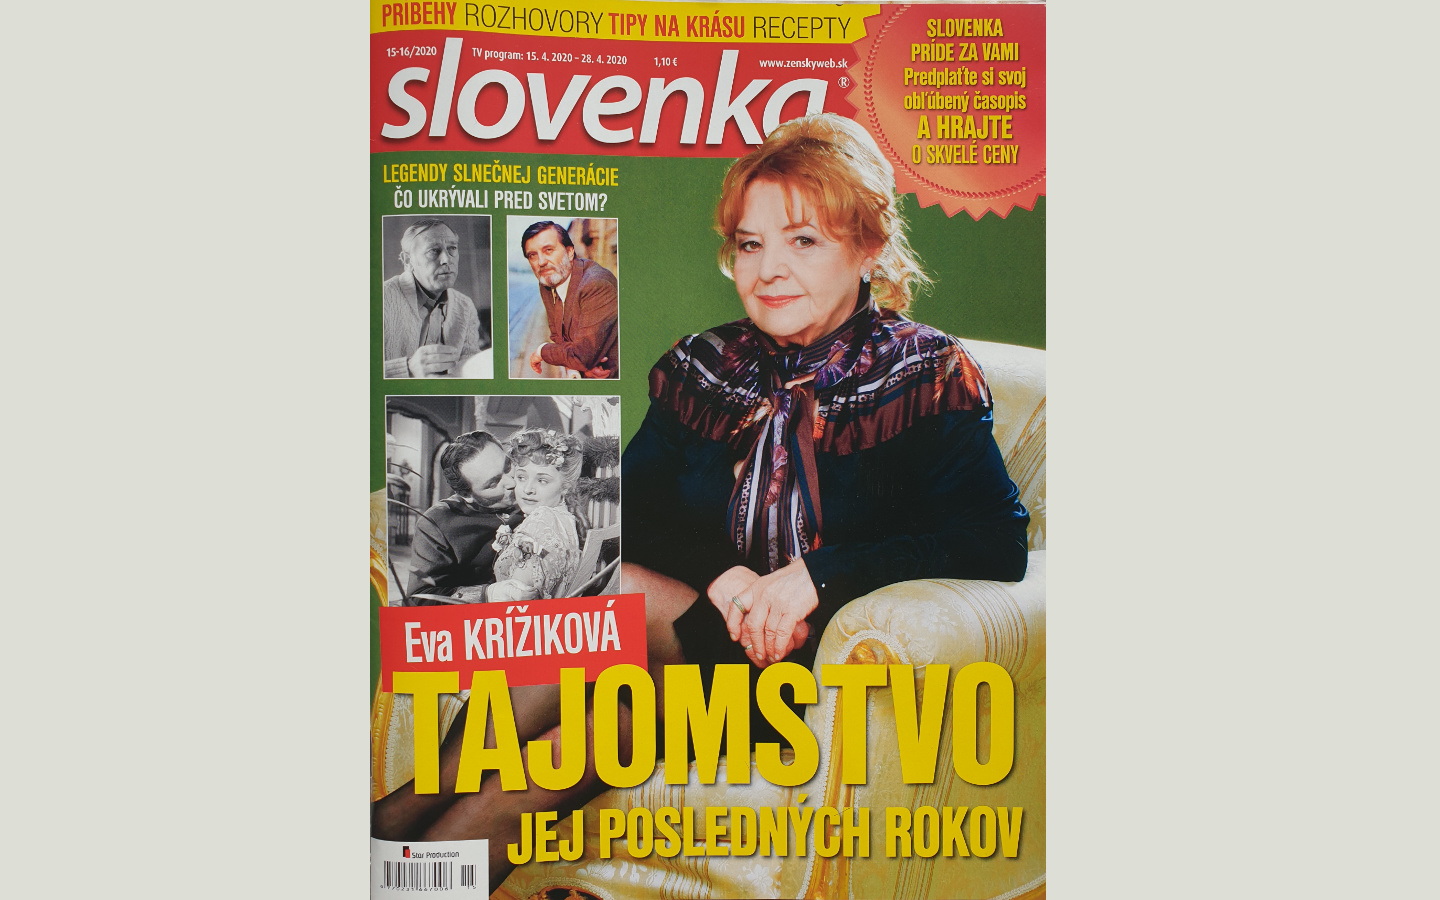 Slovenka magazine about GLOBALEXPO: During the interrupted teaching it is possible to choose an internship